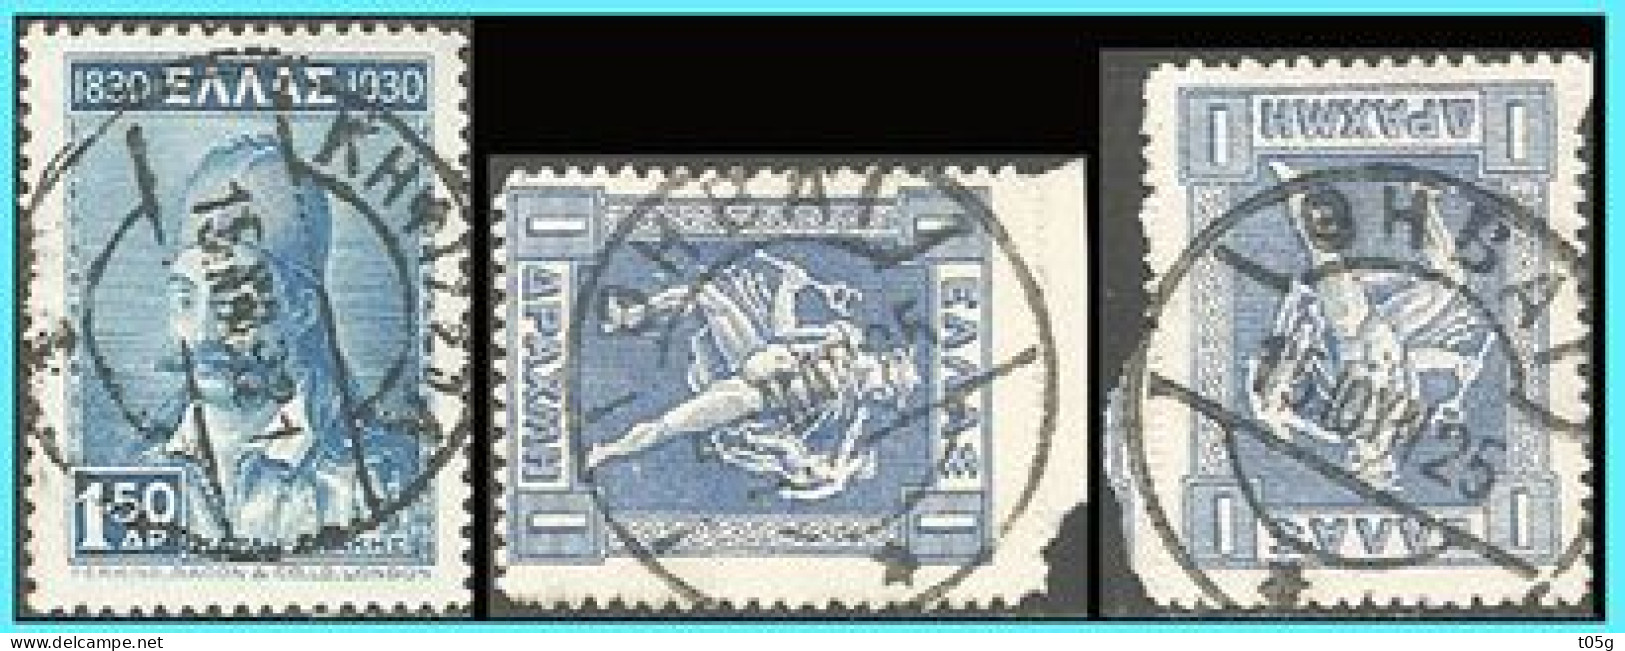 GREECE-GRECE- HELLAS 1913: Canc. (ΚΗΦΙΣΙΑ ΝΟΕ 21) (ΘΗΒΑΙ 1 ΙΟΥΝ 25) On 1drx Lithographic  used - Used Stamps